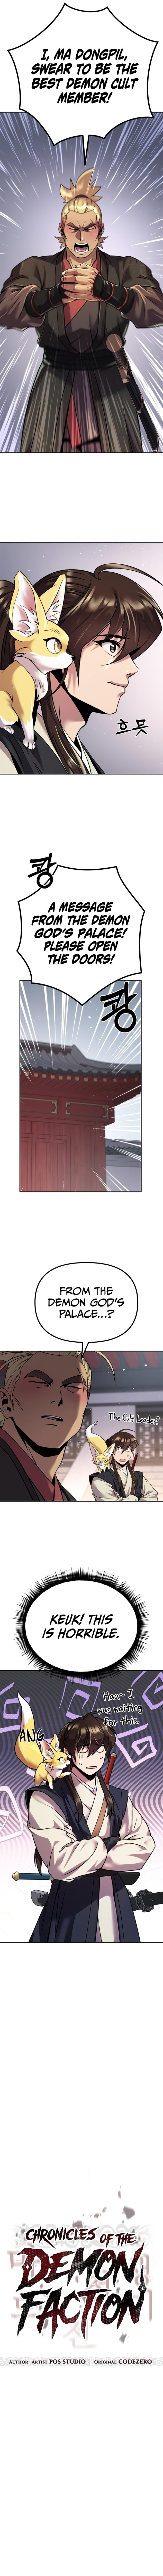 chronicles-of-the-demon-faction-chap-45-5